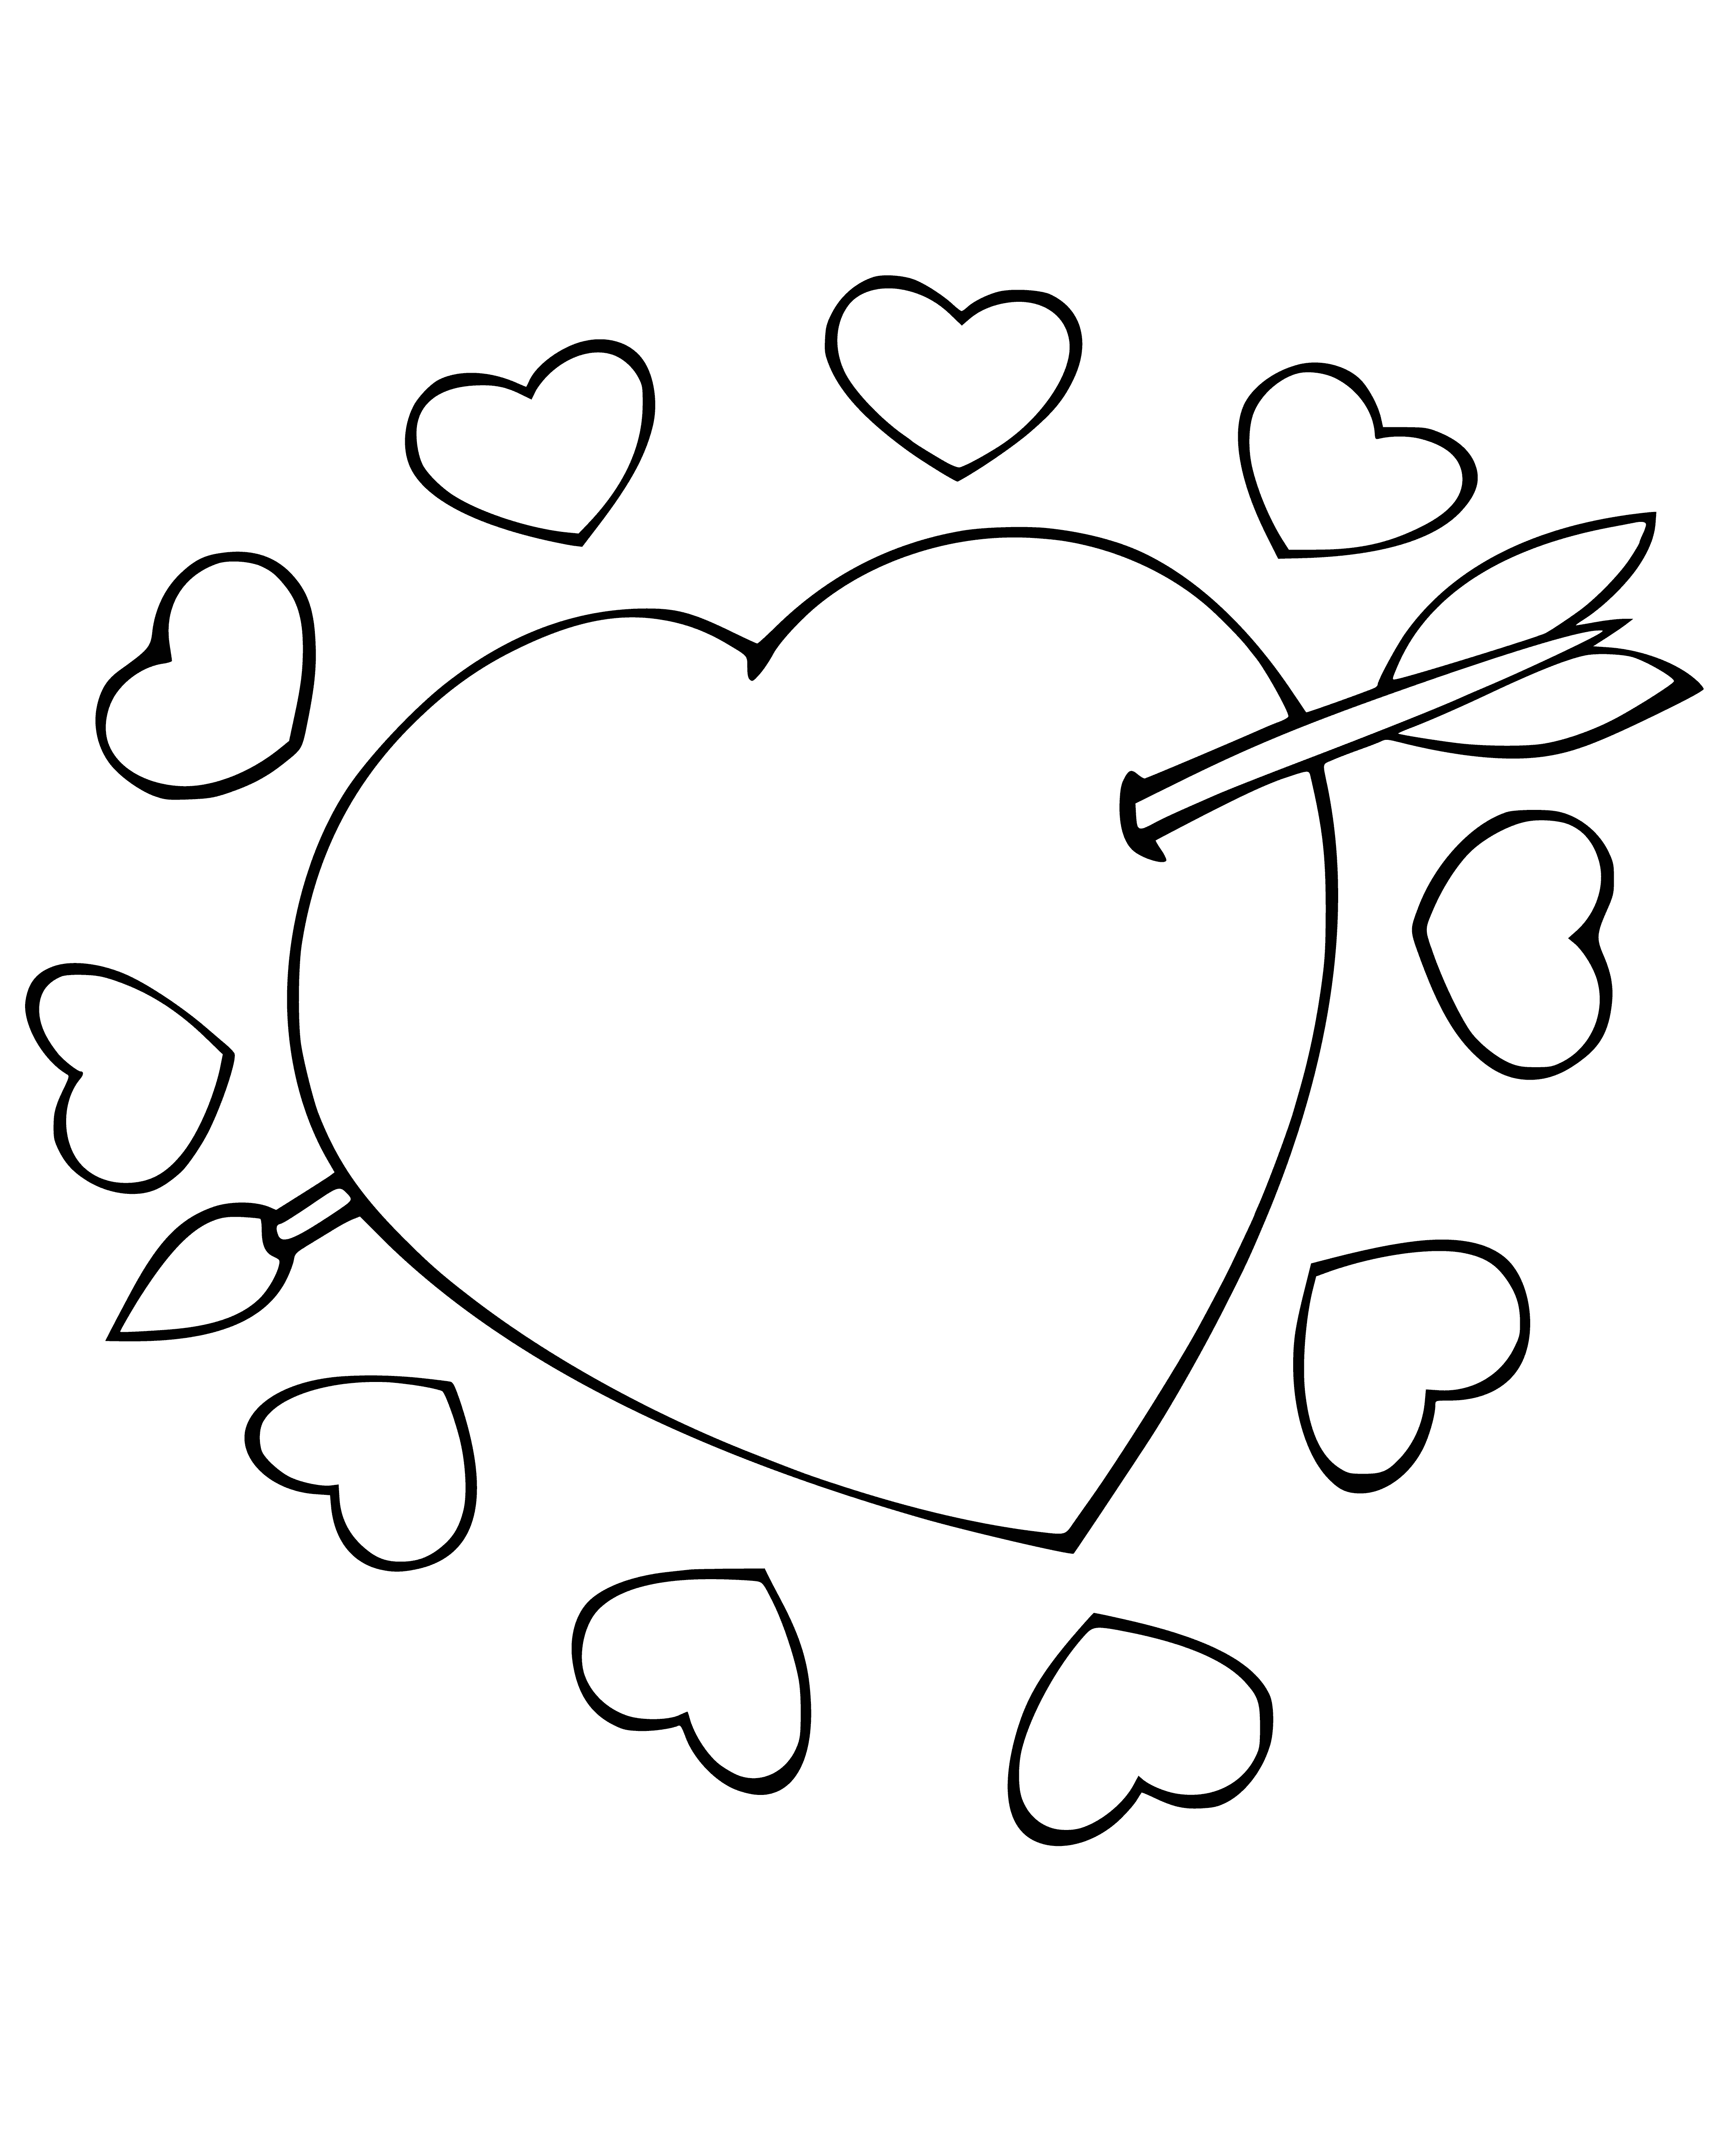 Pierced heart coloring page